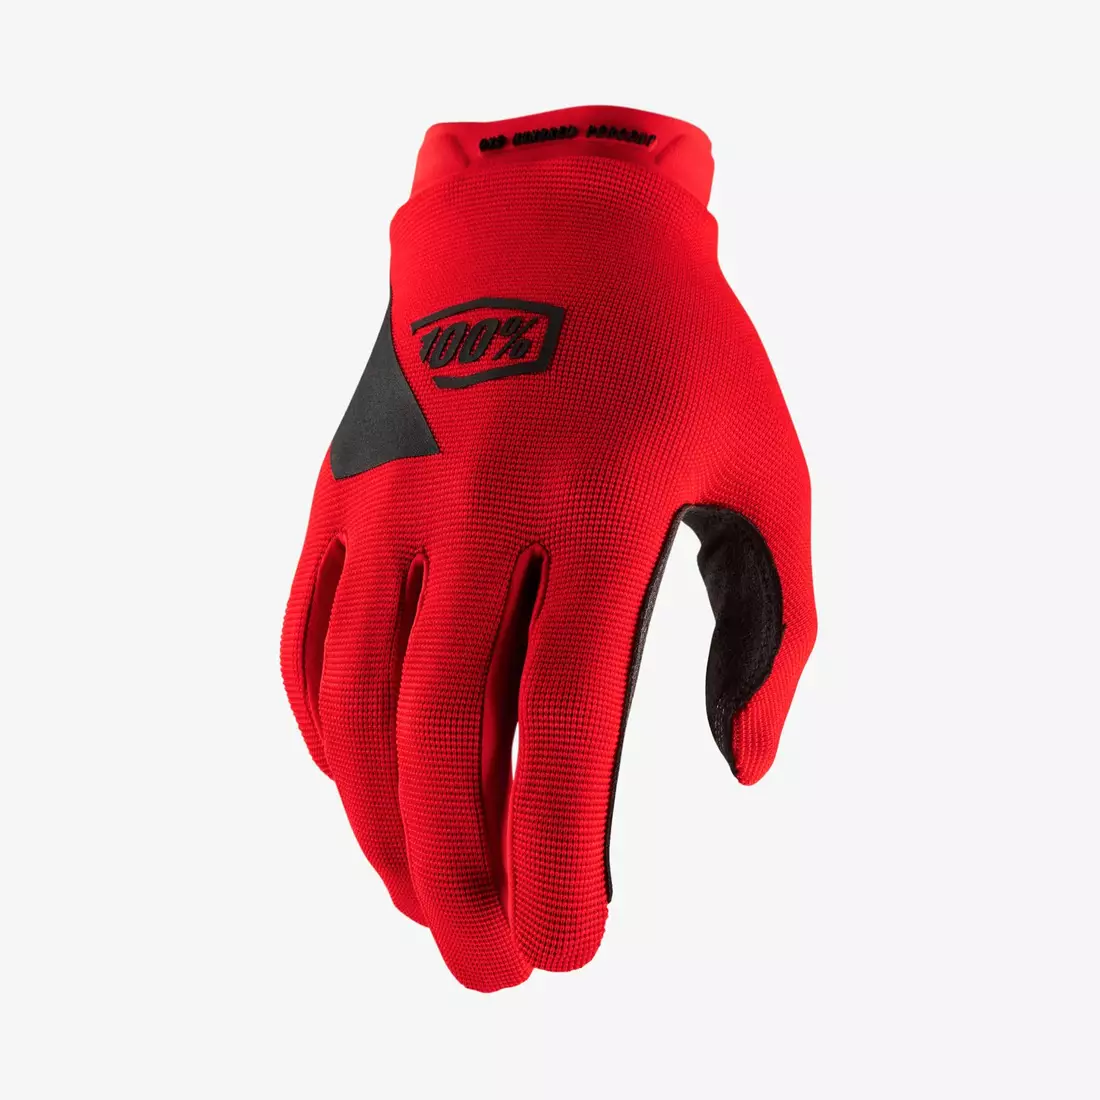 100% bicycle gloves ridecamp red STO-10018-003-12